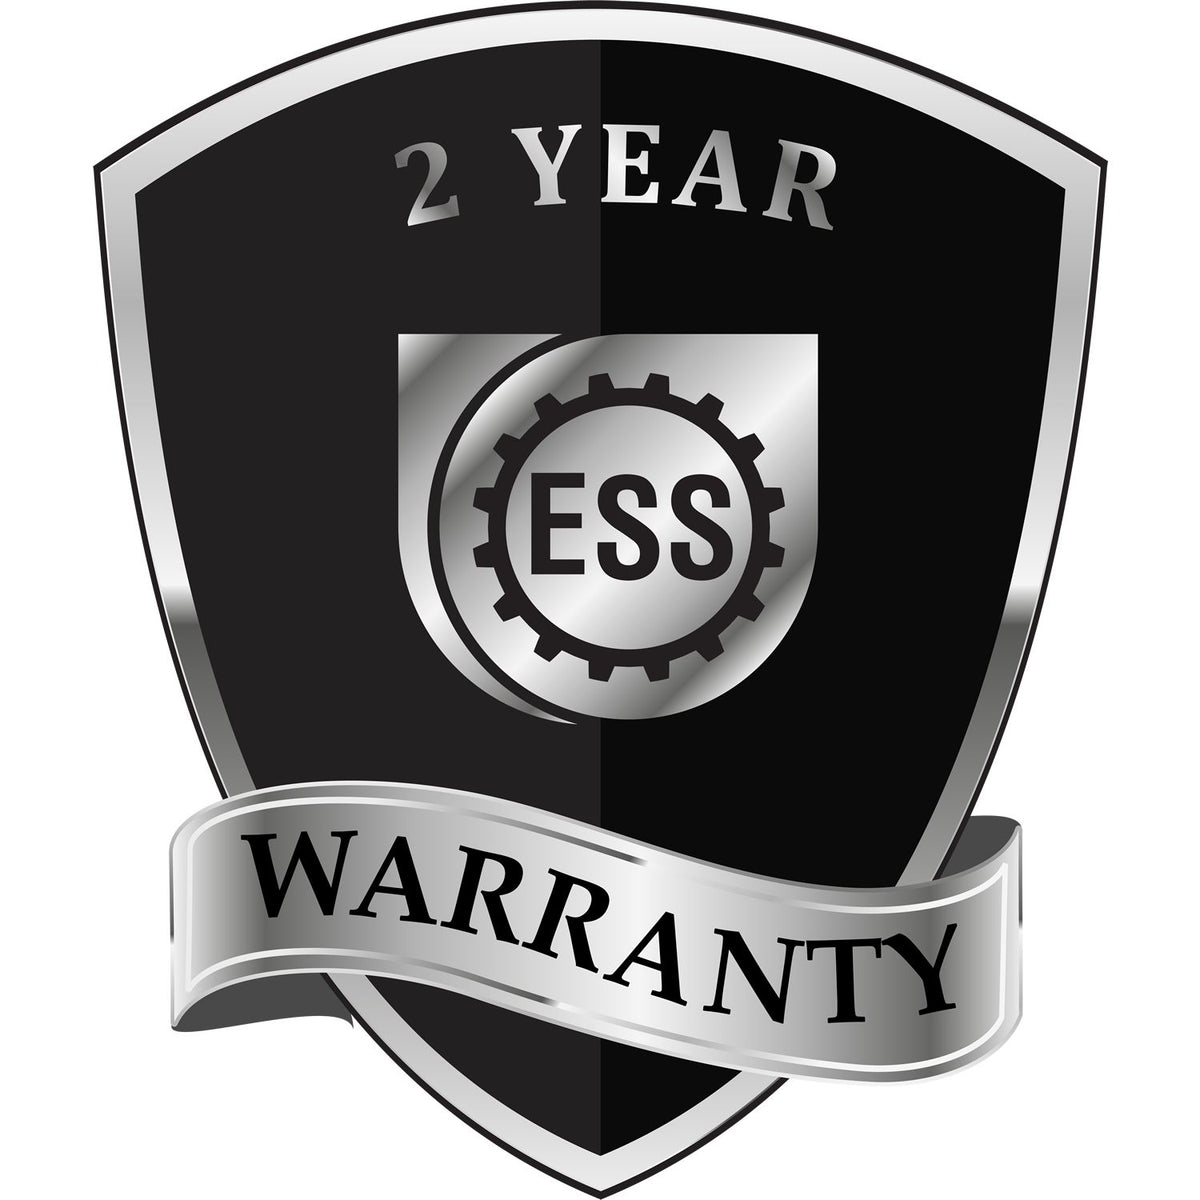 A black and silver badge or emblem showing warranty information for the Hybrid Kentucky Land Surveyor Seal